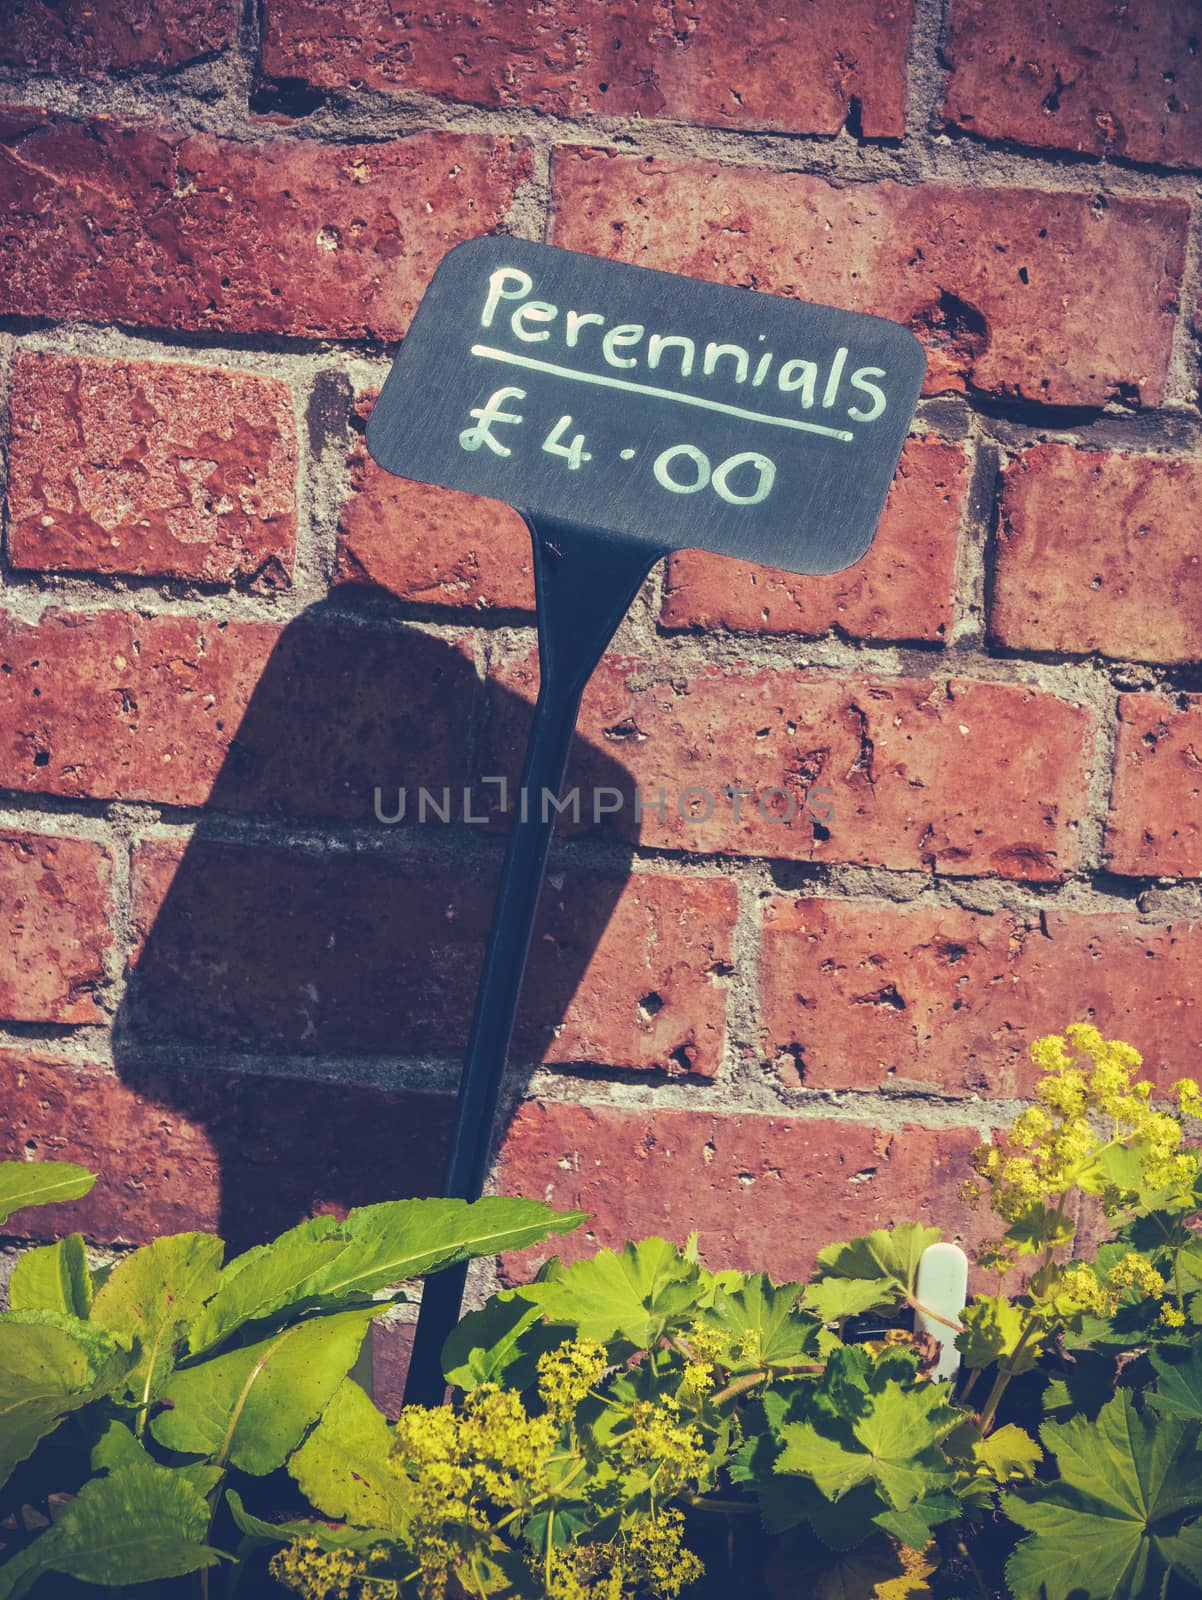 Sign For A Perennials Plant Sale At A UK Farmers' Market